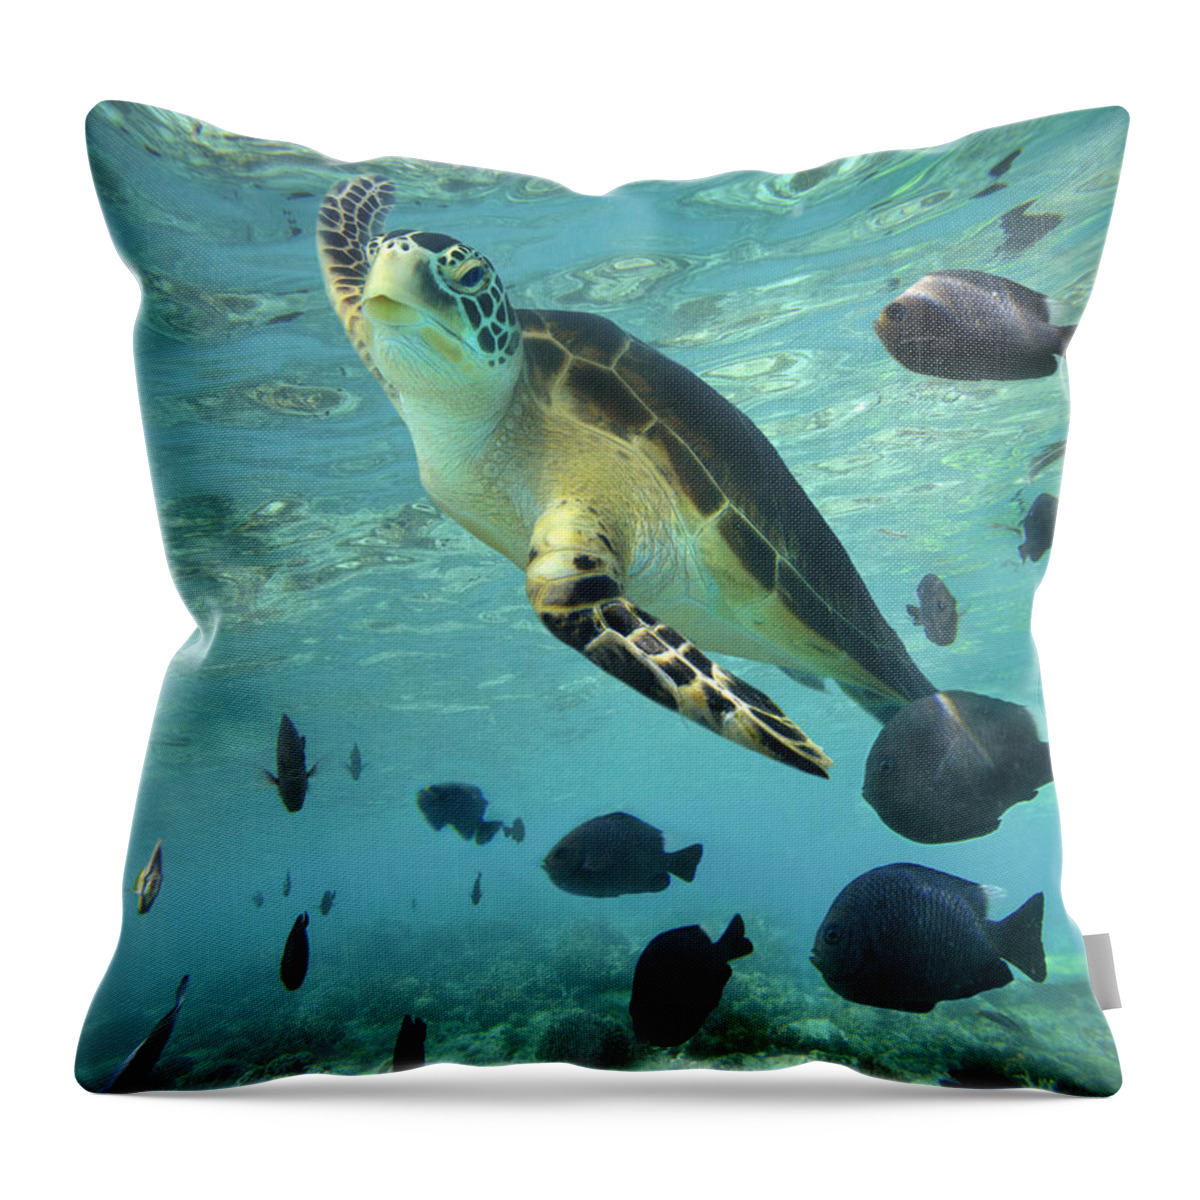 00451420 Throw Pillow featuring the photograph Green Sea Turtle Balicasag Island by Tim Fitzharris